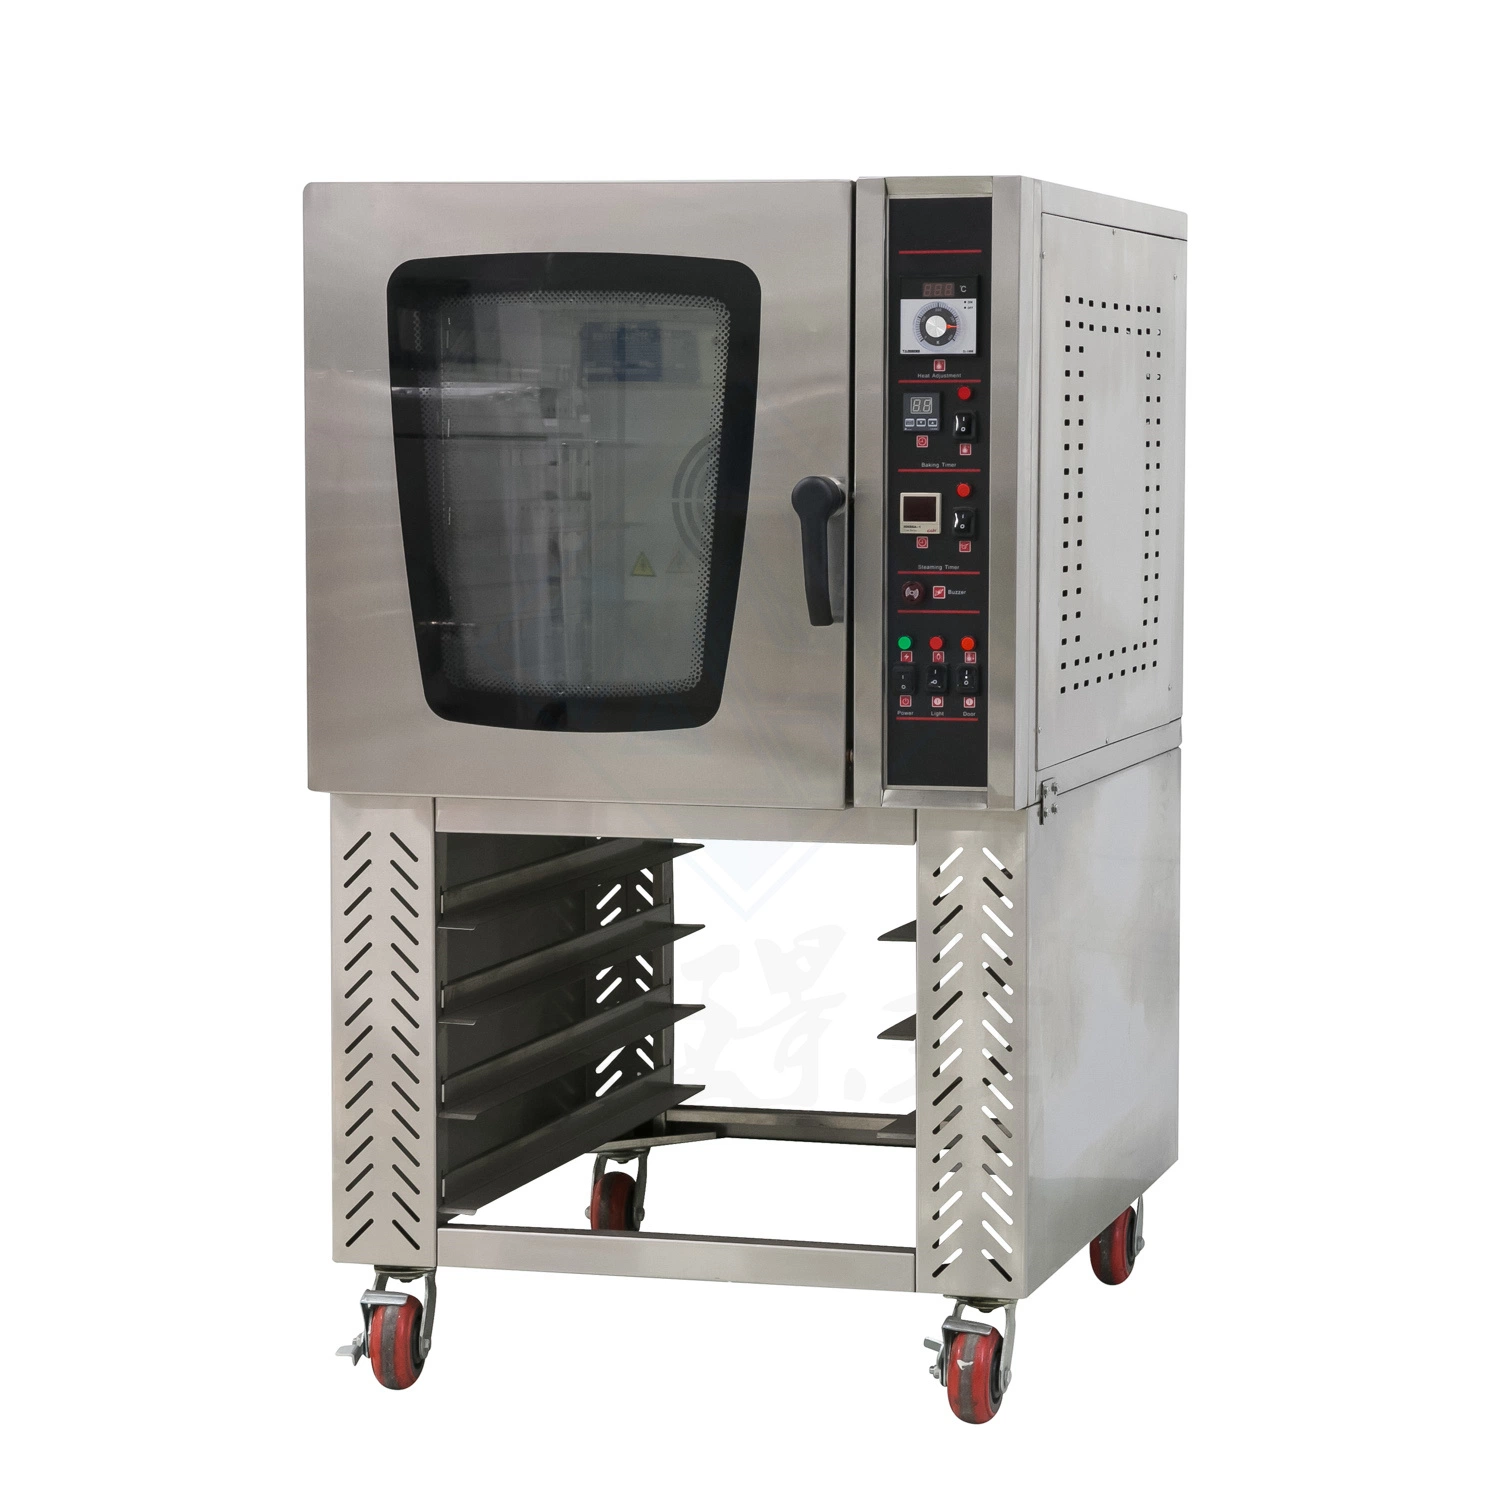 10 Trays Gas Heating Hot Air Convection Oven for Heating Food